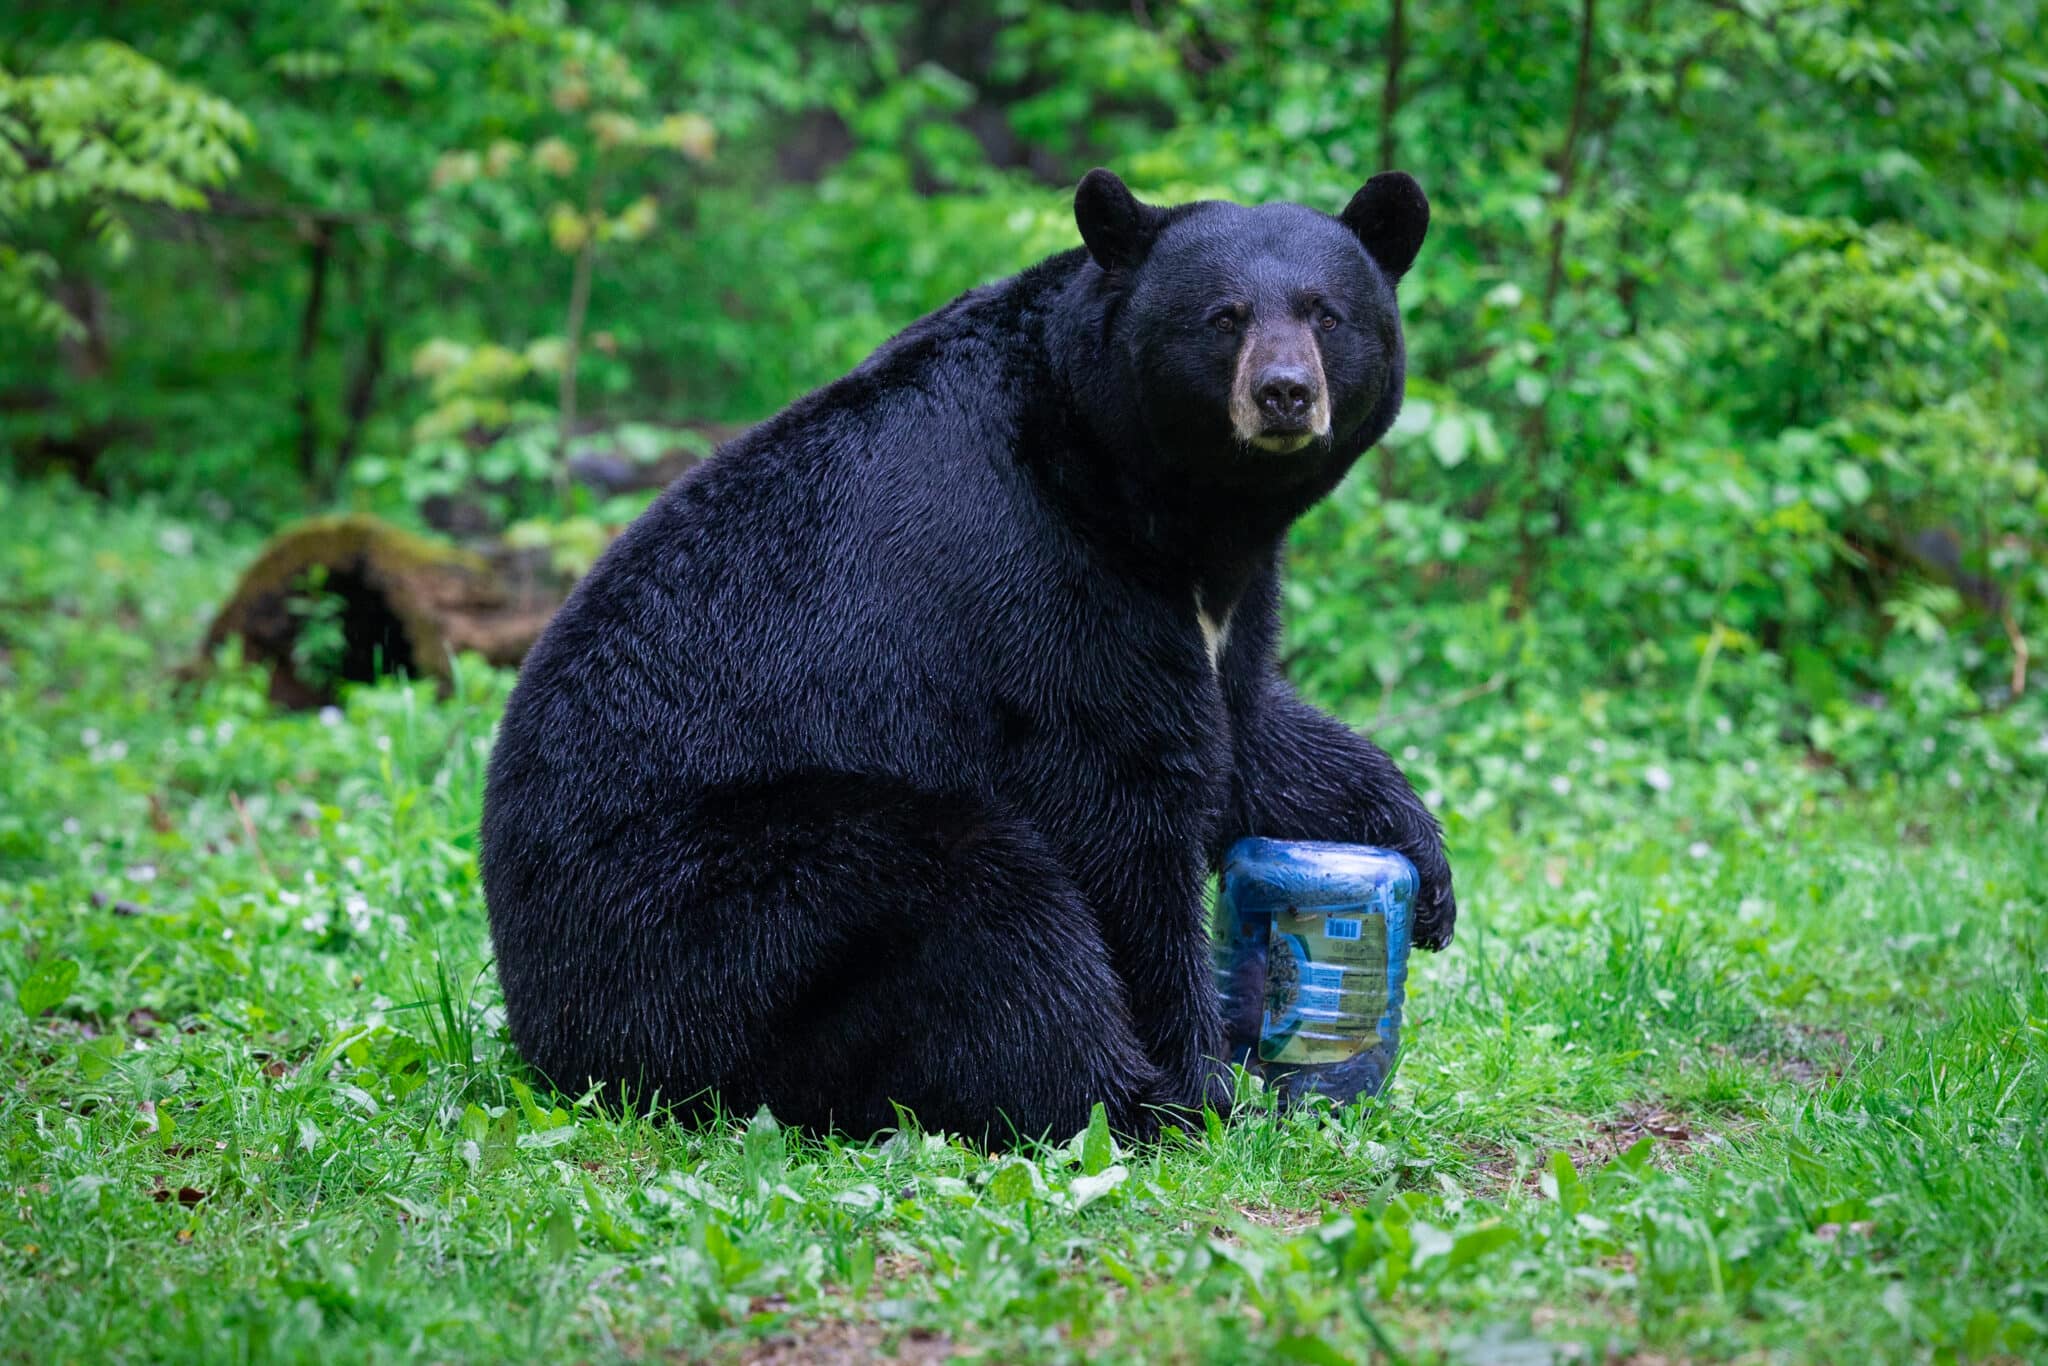 A black bear stares at the camera while trying to open a BearVault canister.